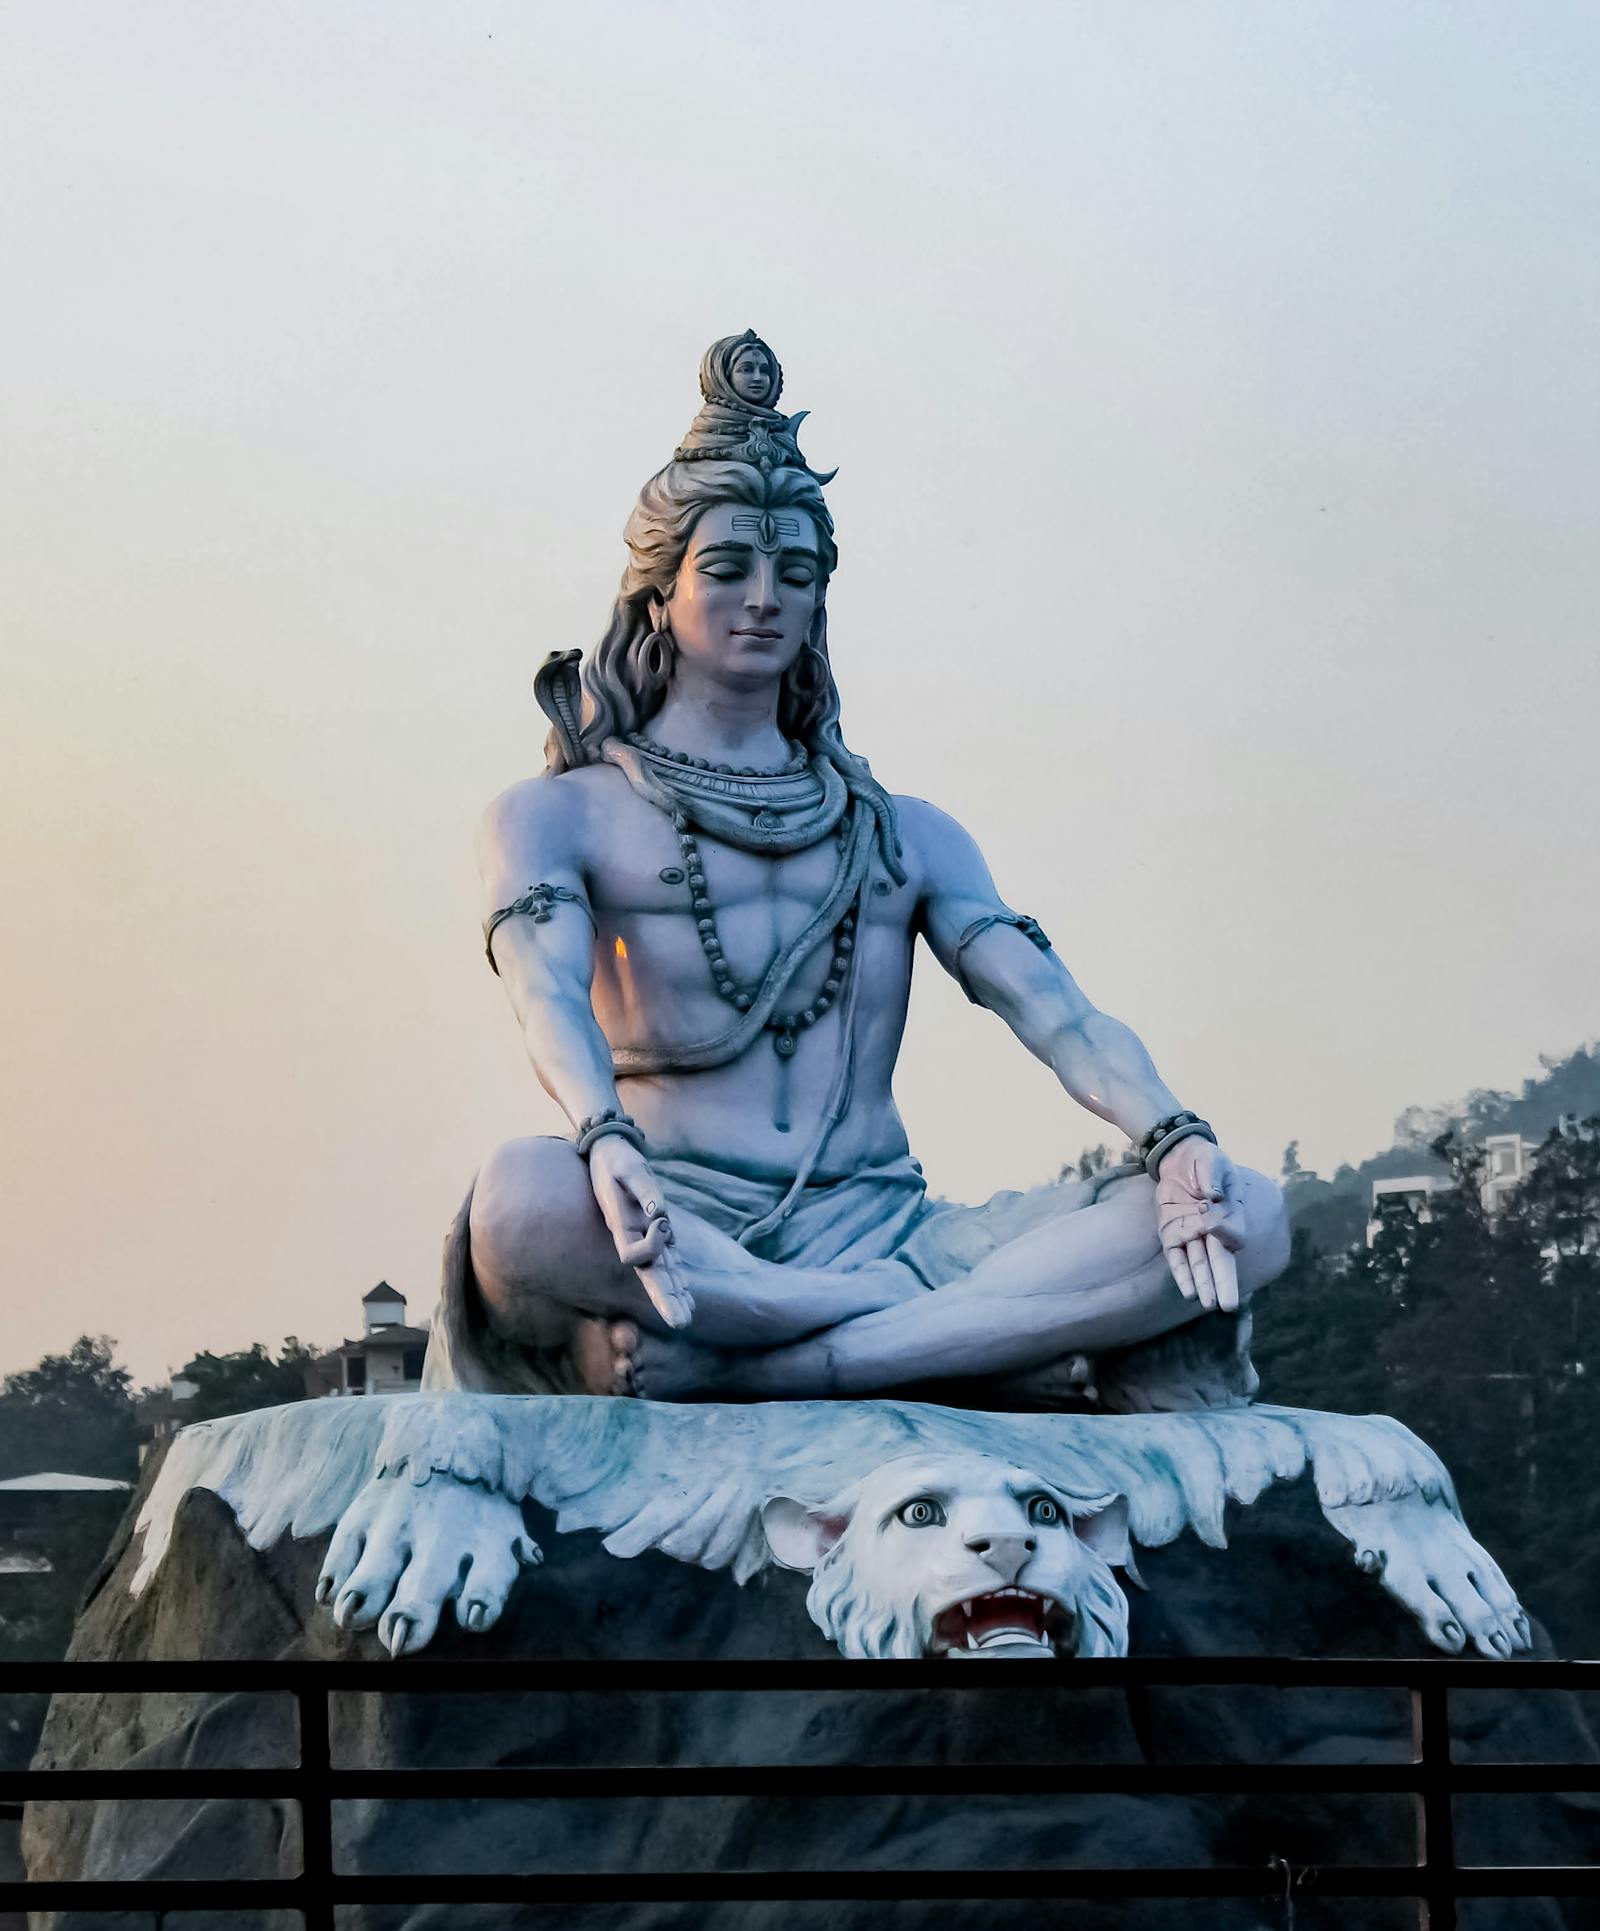 Lord Shiva Photo by Sandeep Singh from Pexels: https://www.pexels.com/photo/city-people-woman-art-7104962/